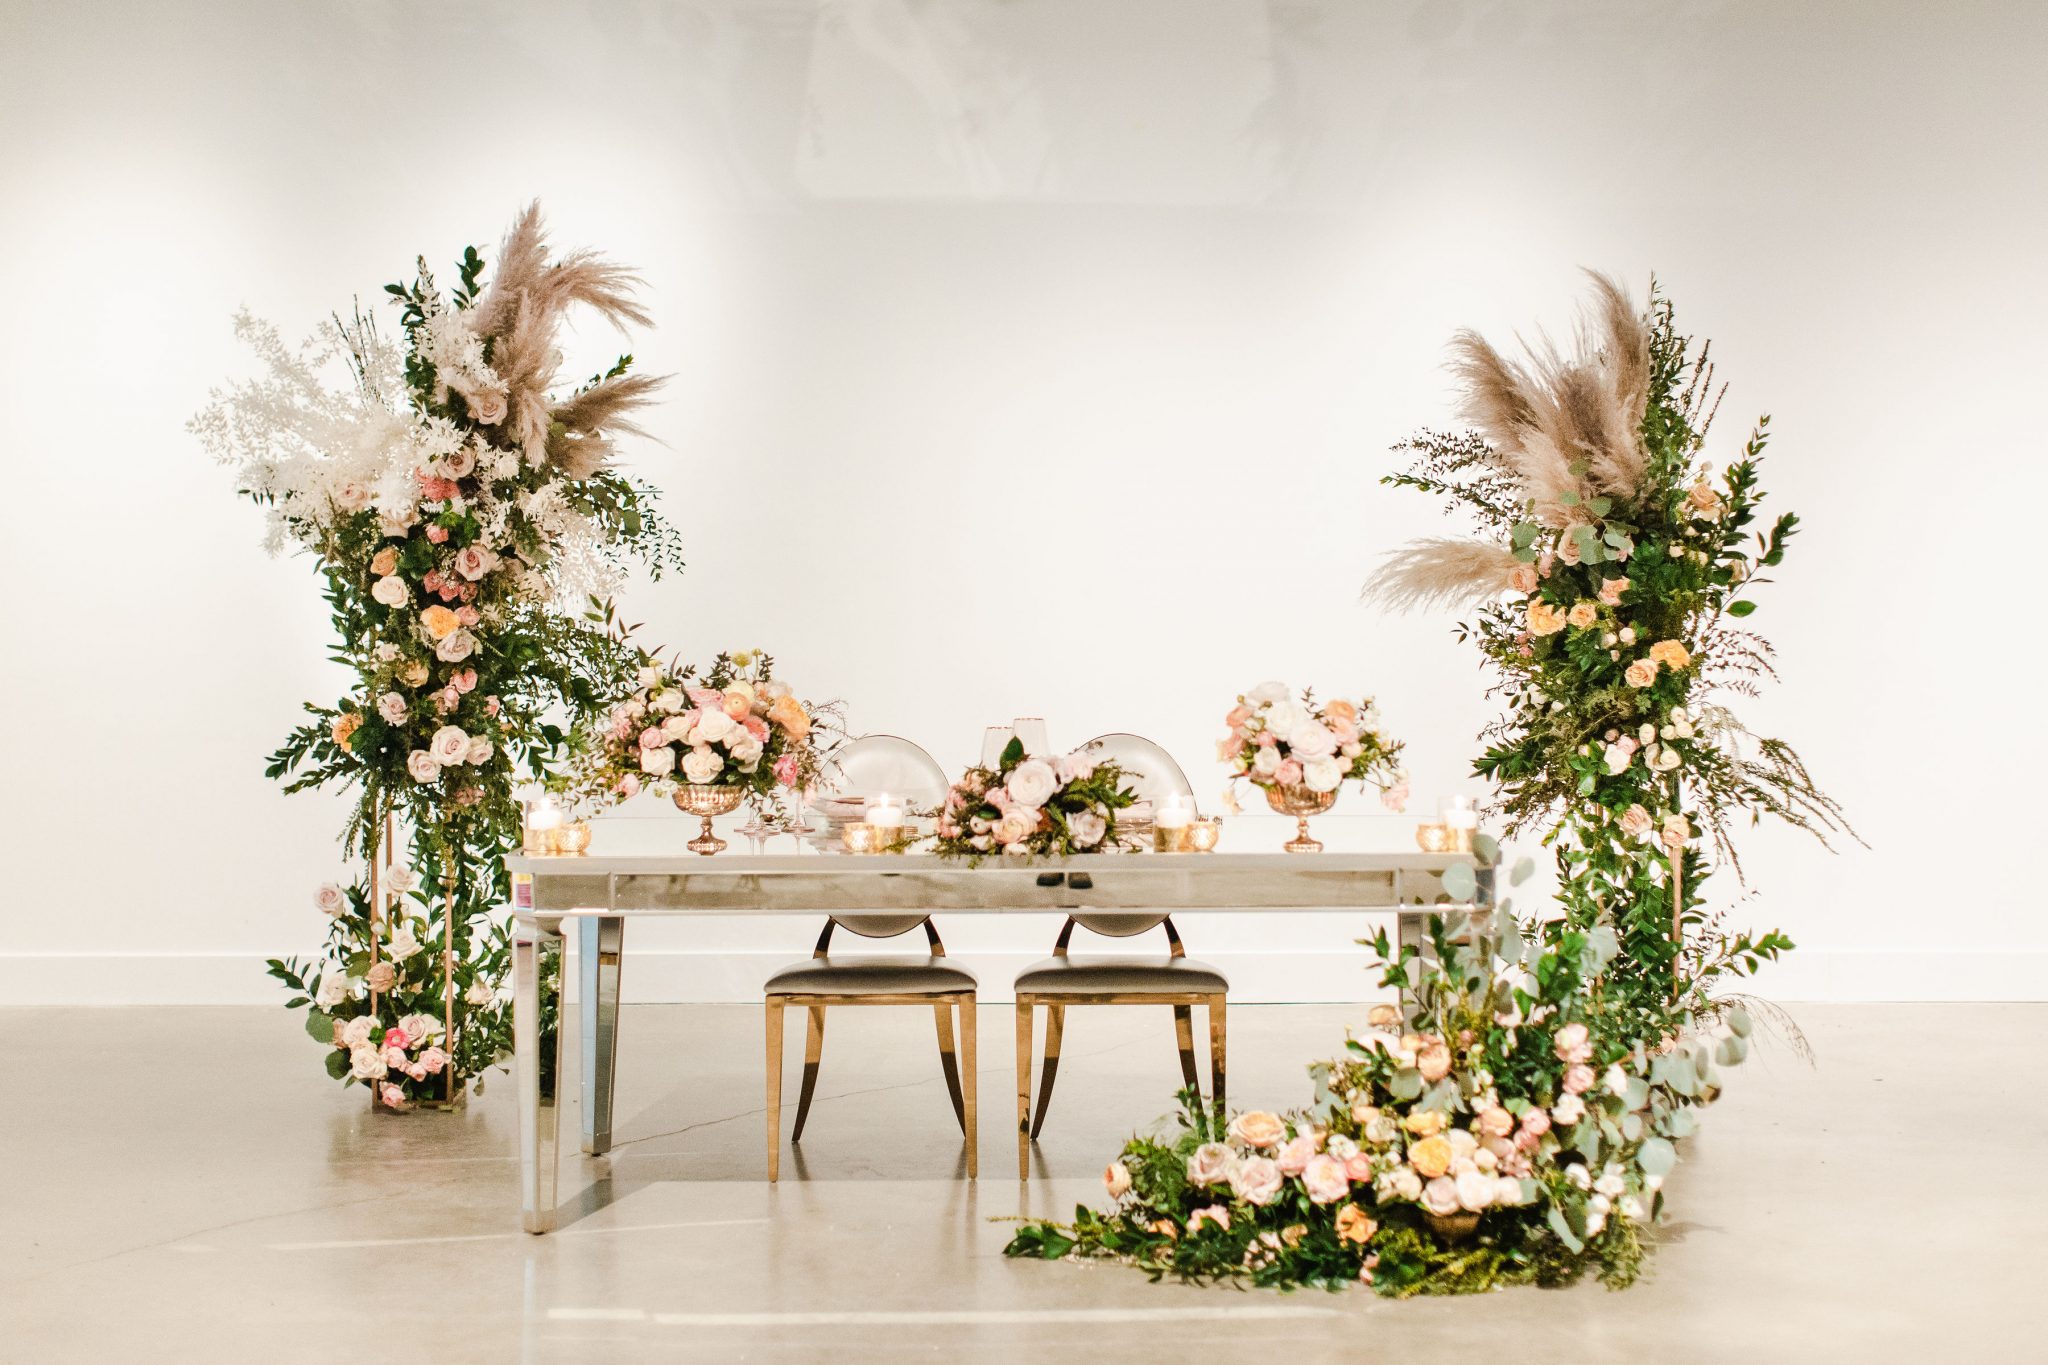 Wedding Tablescape Inspiration - local wedding advice and inspiration featured on Bronte Bride